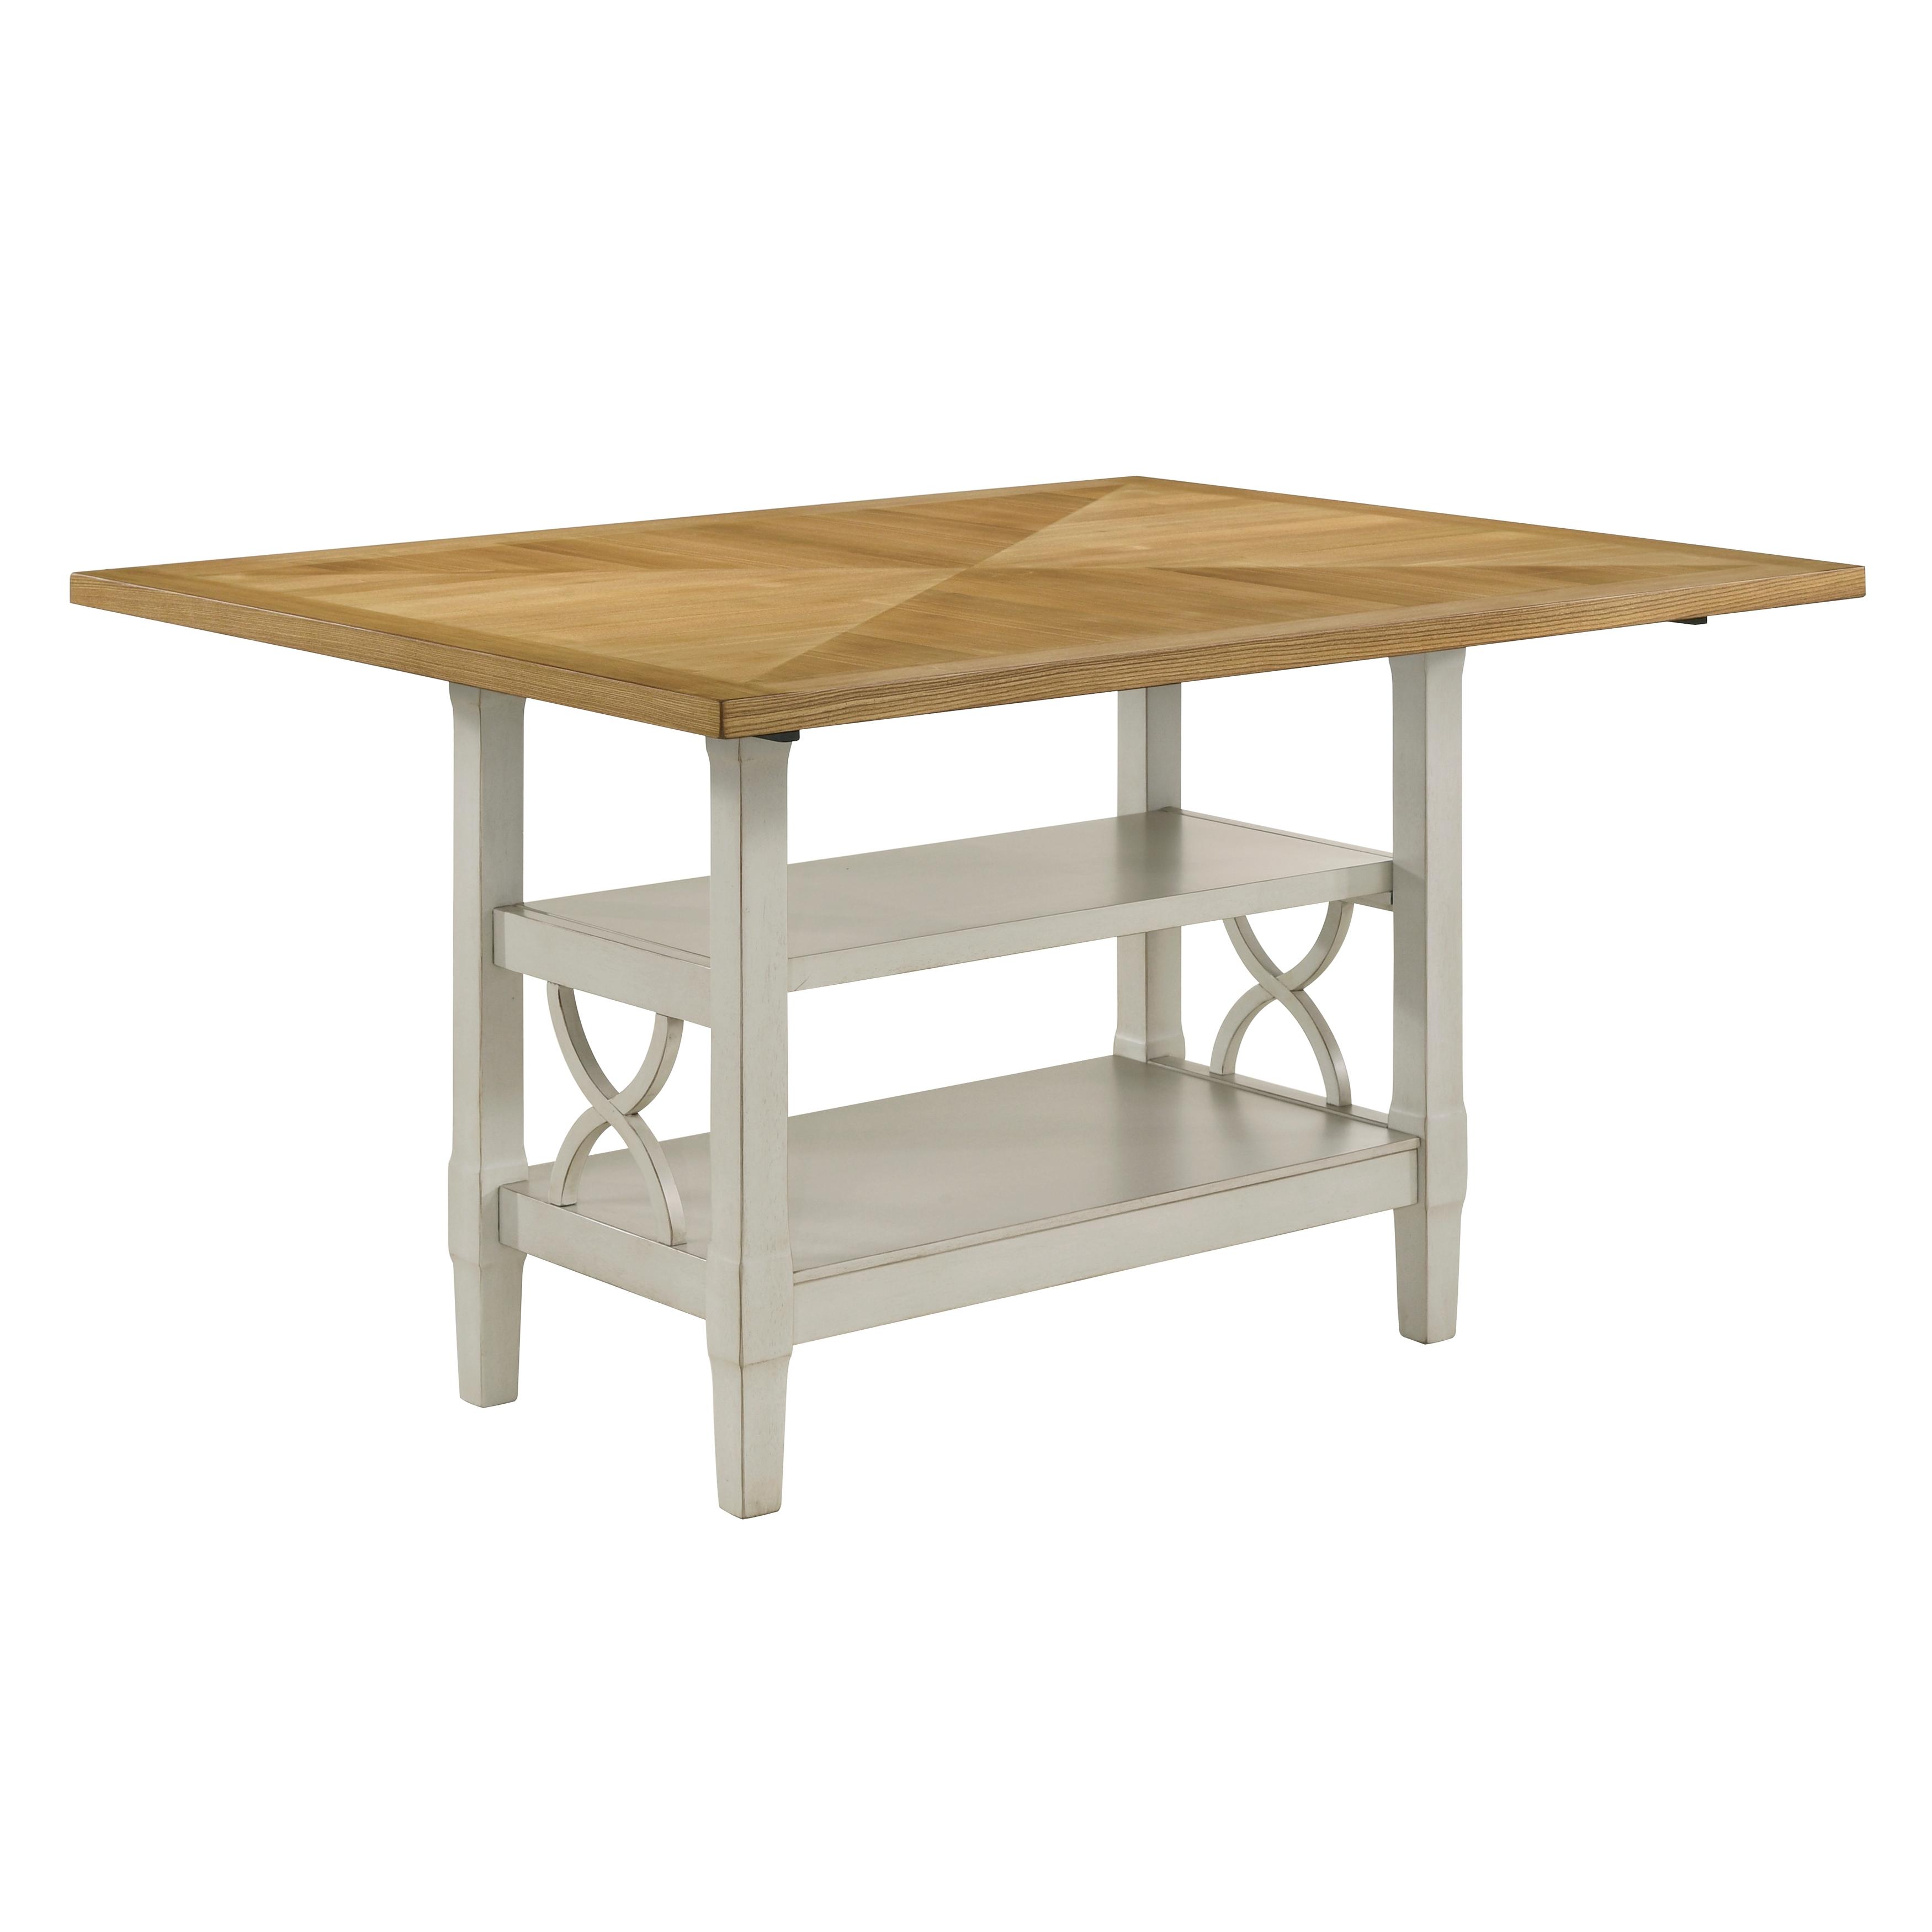 Modern, Traditional Counter Height Table Maribelle Counter Height Table 5910-36* 5910-36* in Oak, Gray 